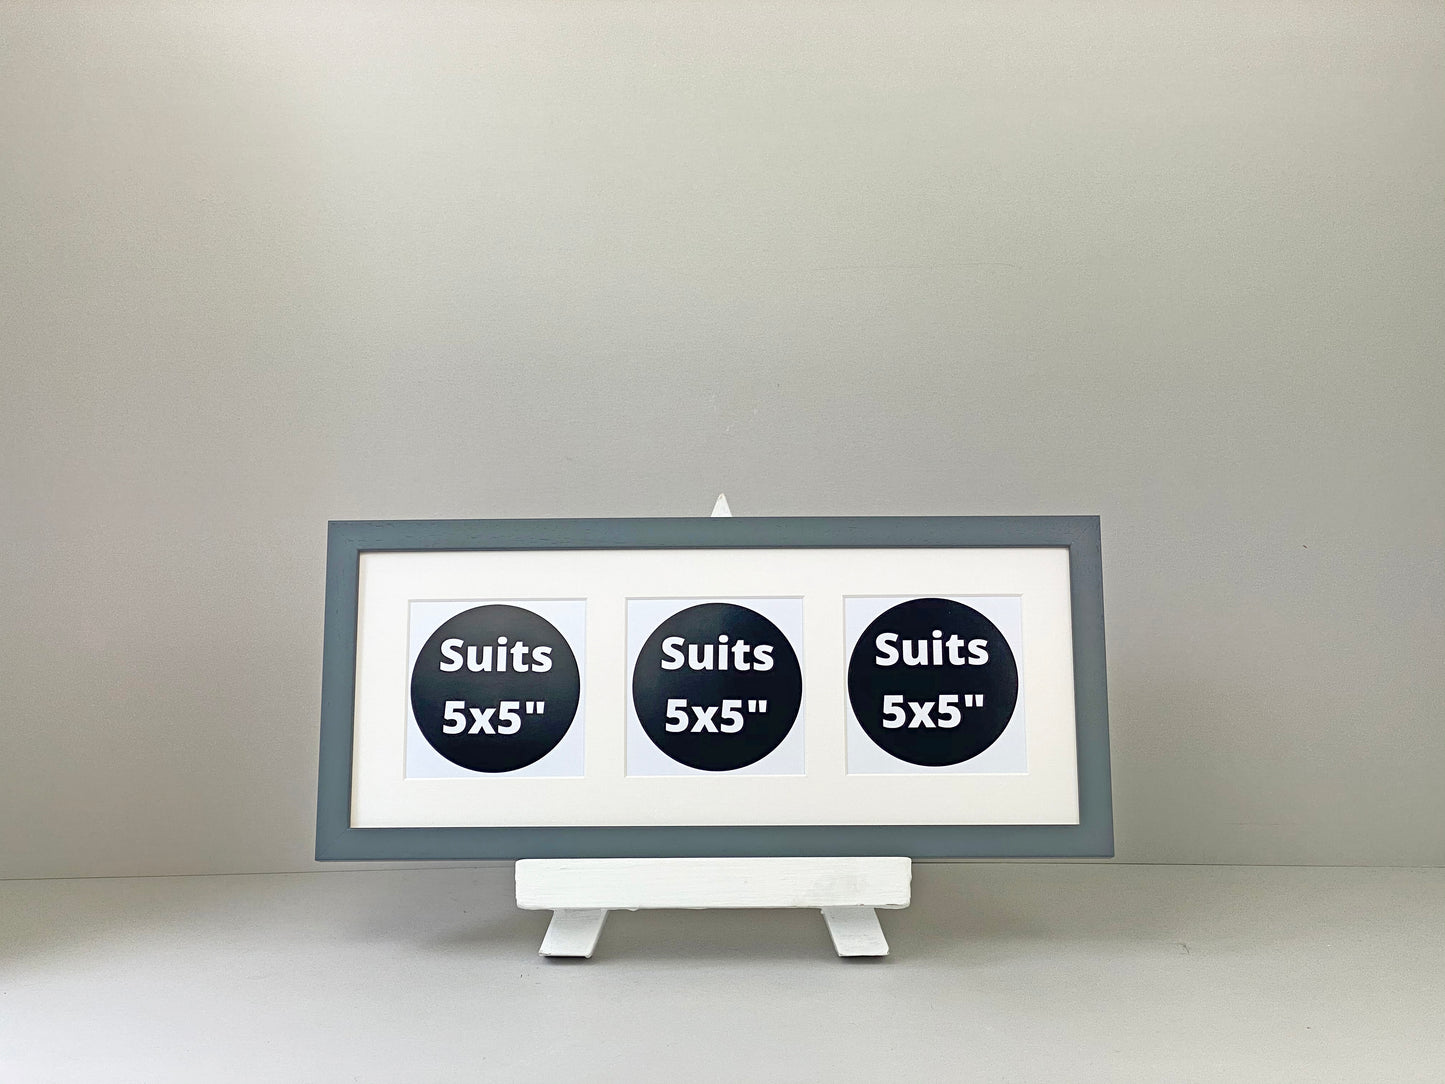 Suits Three 5x5" pictures. 20x50cm. Wooden Multi Aperture Photo Frame. - PhotoFramesandMore